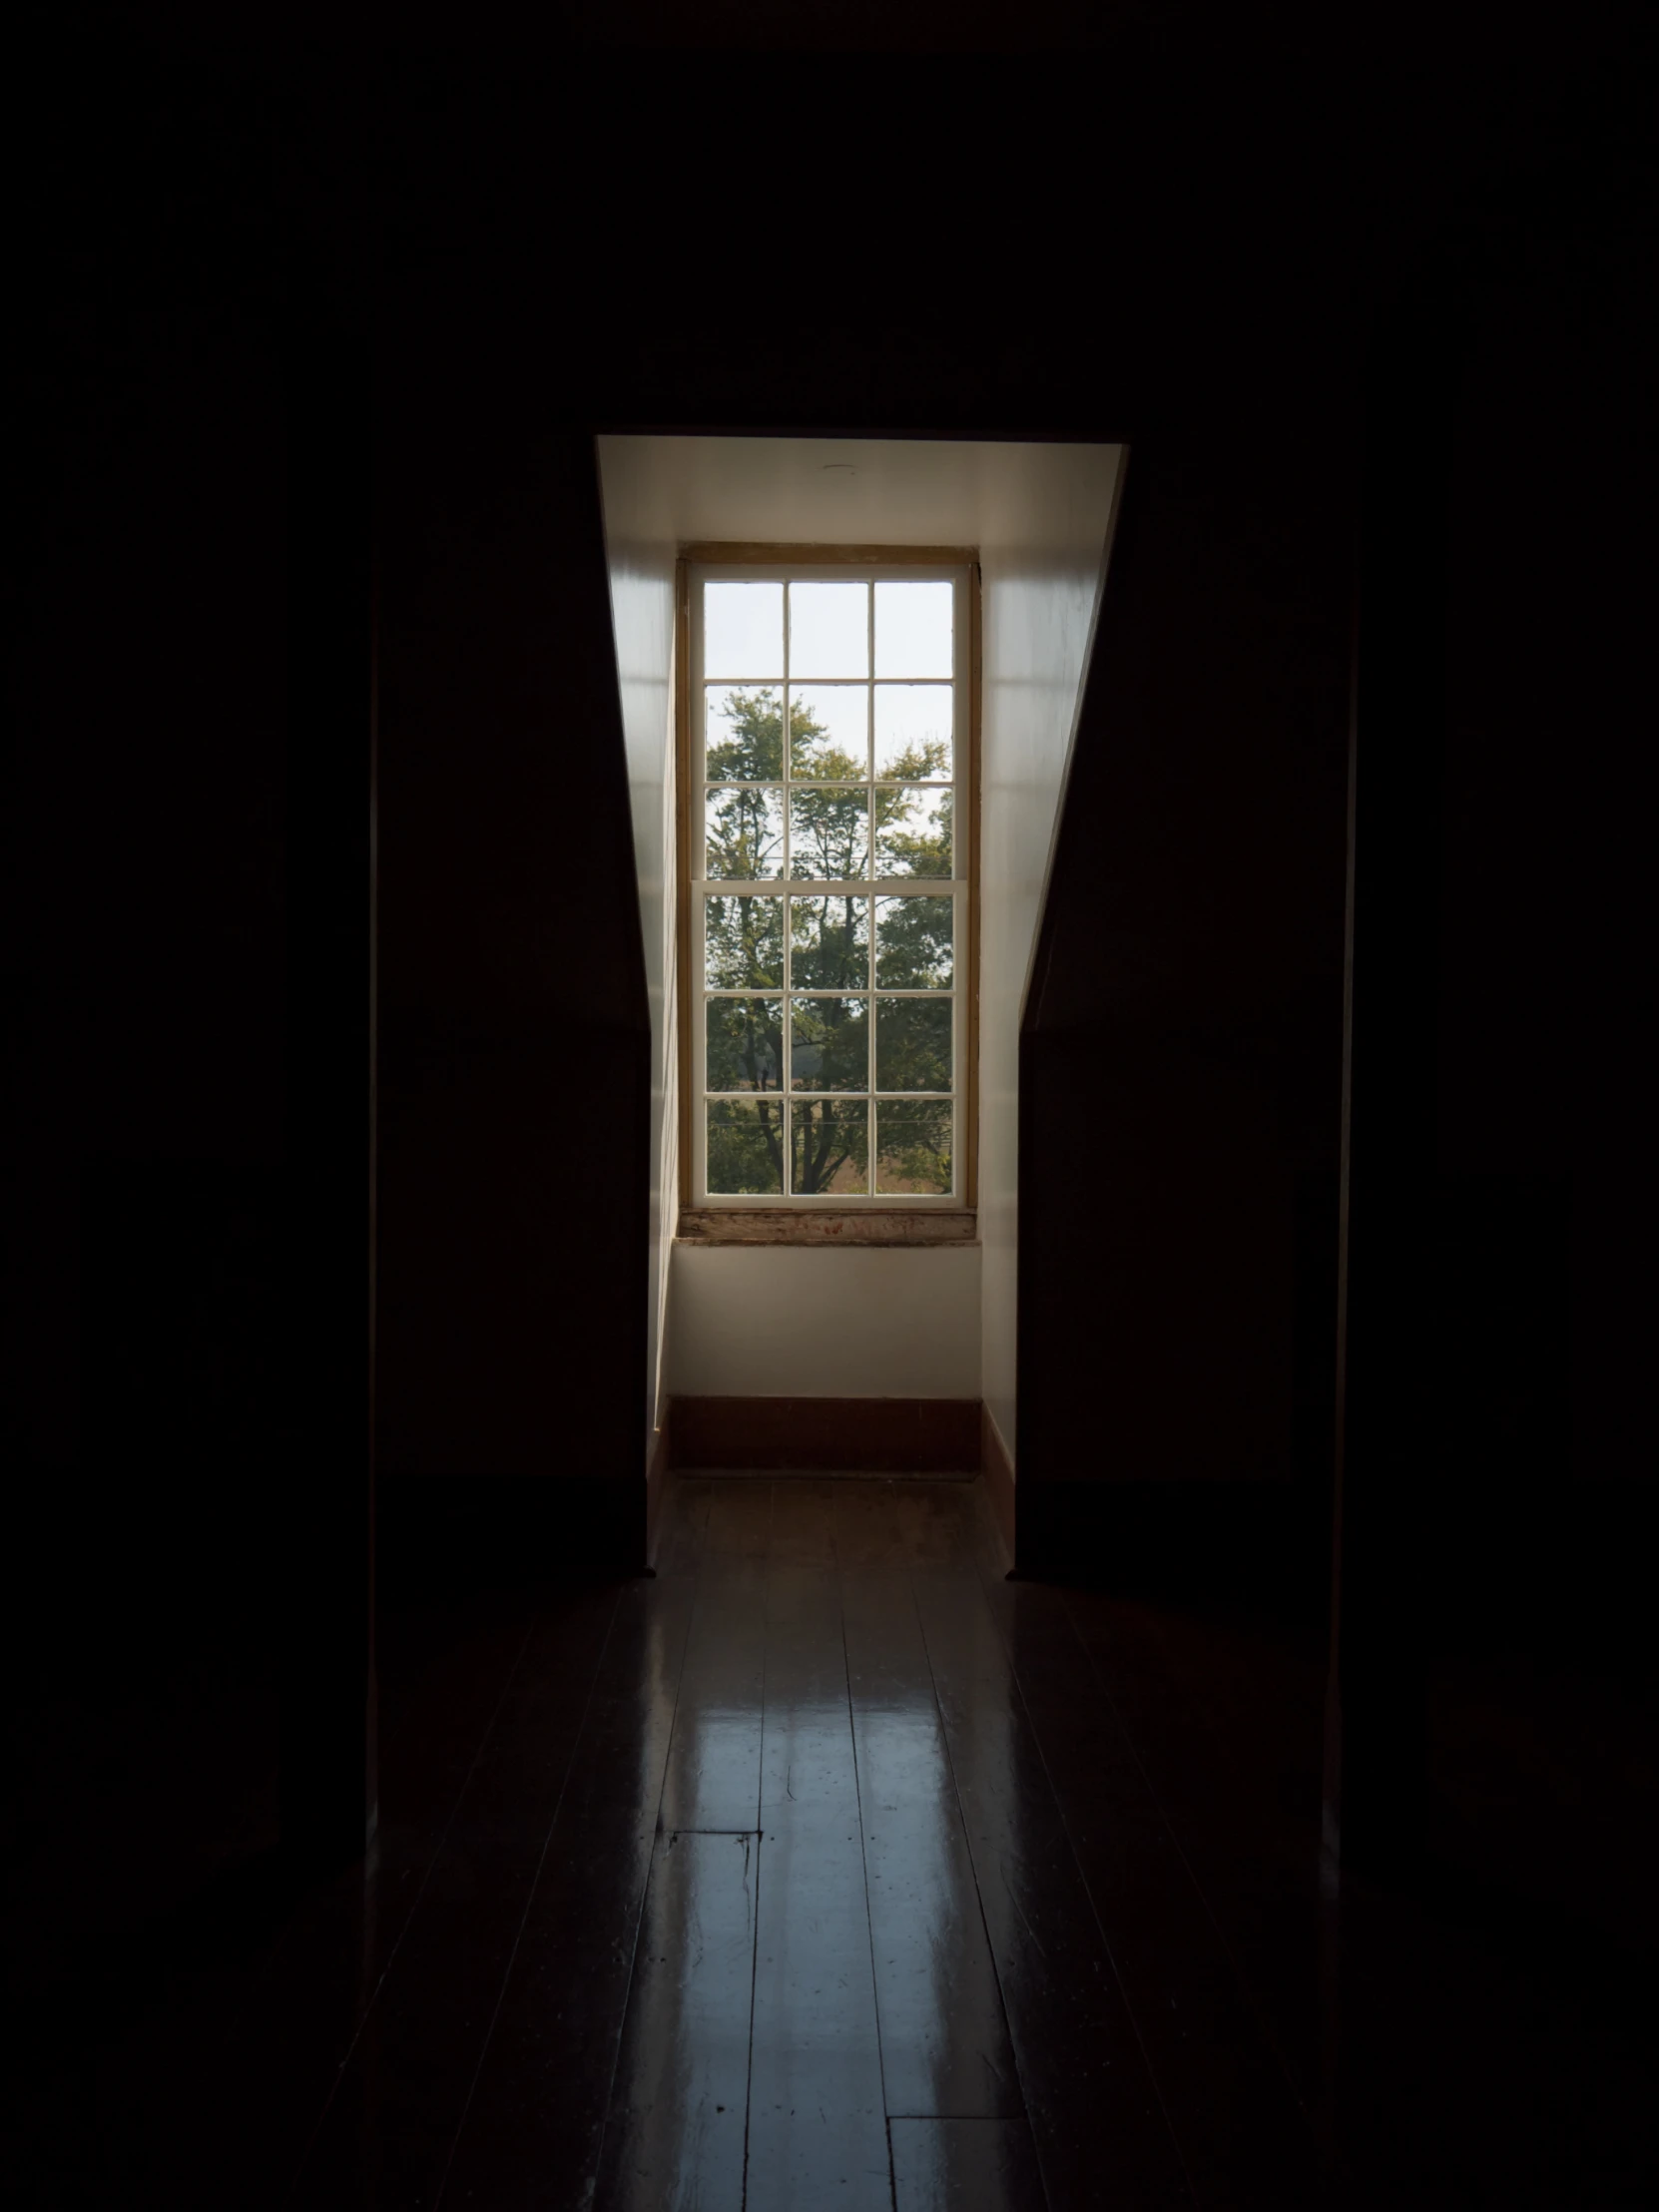 a dimly lit room with a tree outside the window